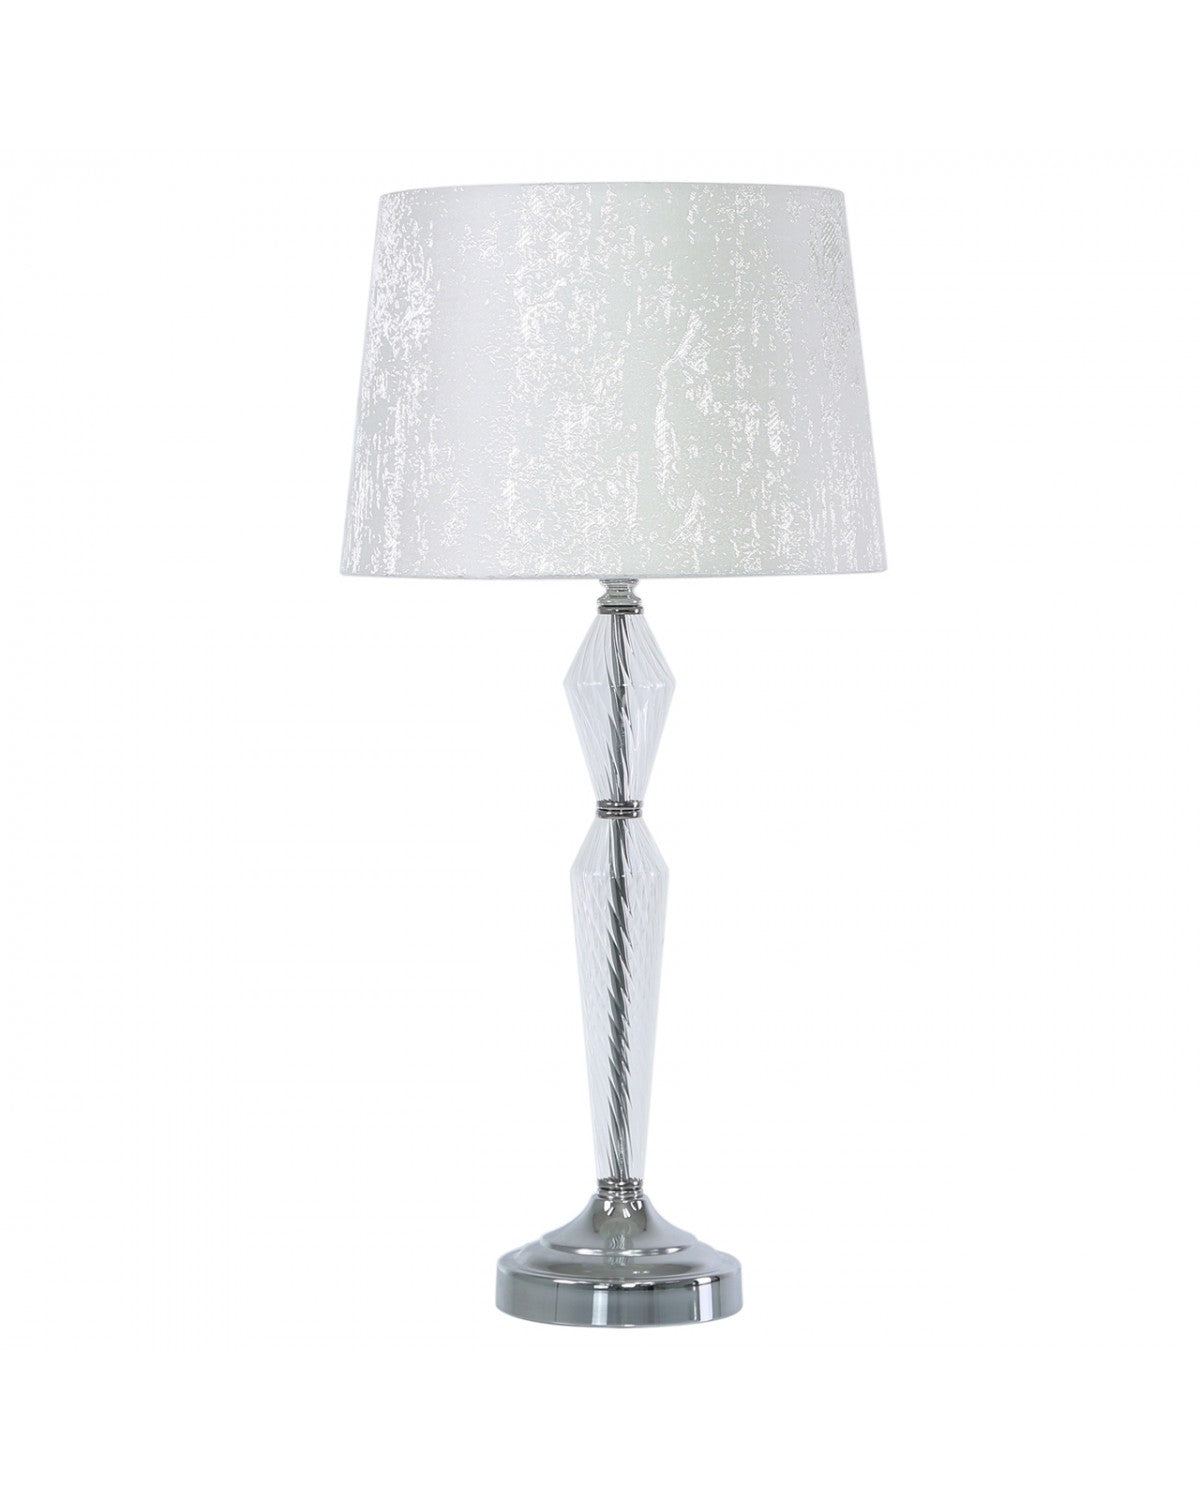 Deco Home 58cm Metal And Glass Table Lamp With White Cotton Shade